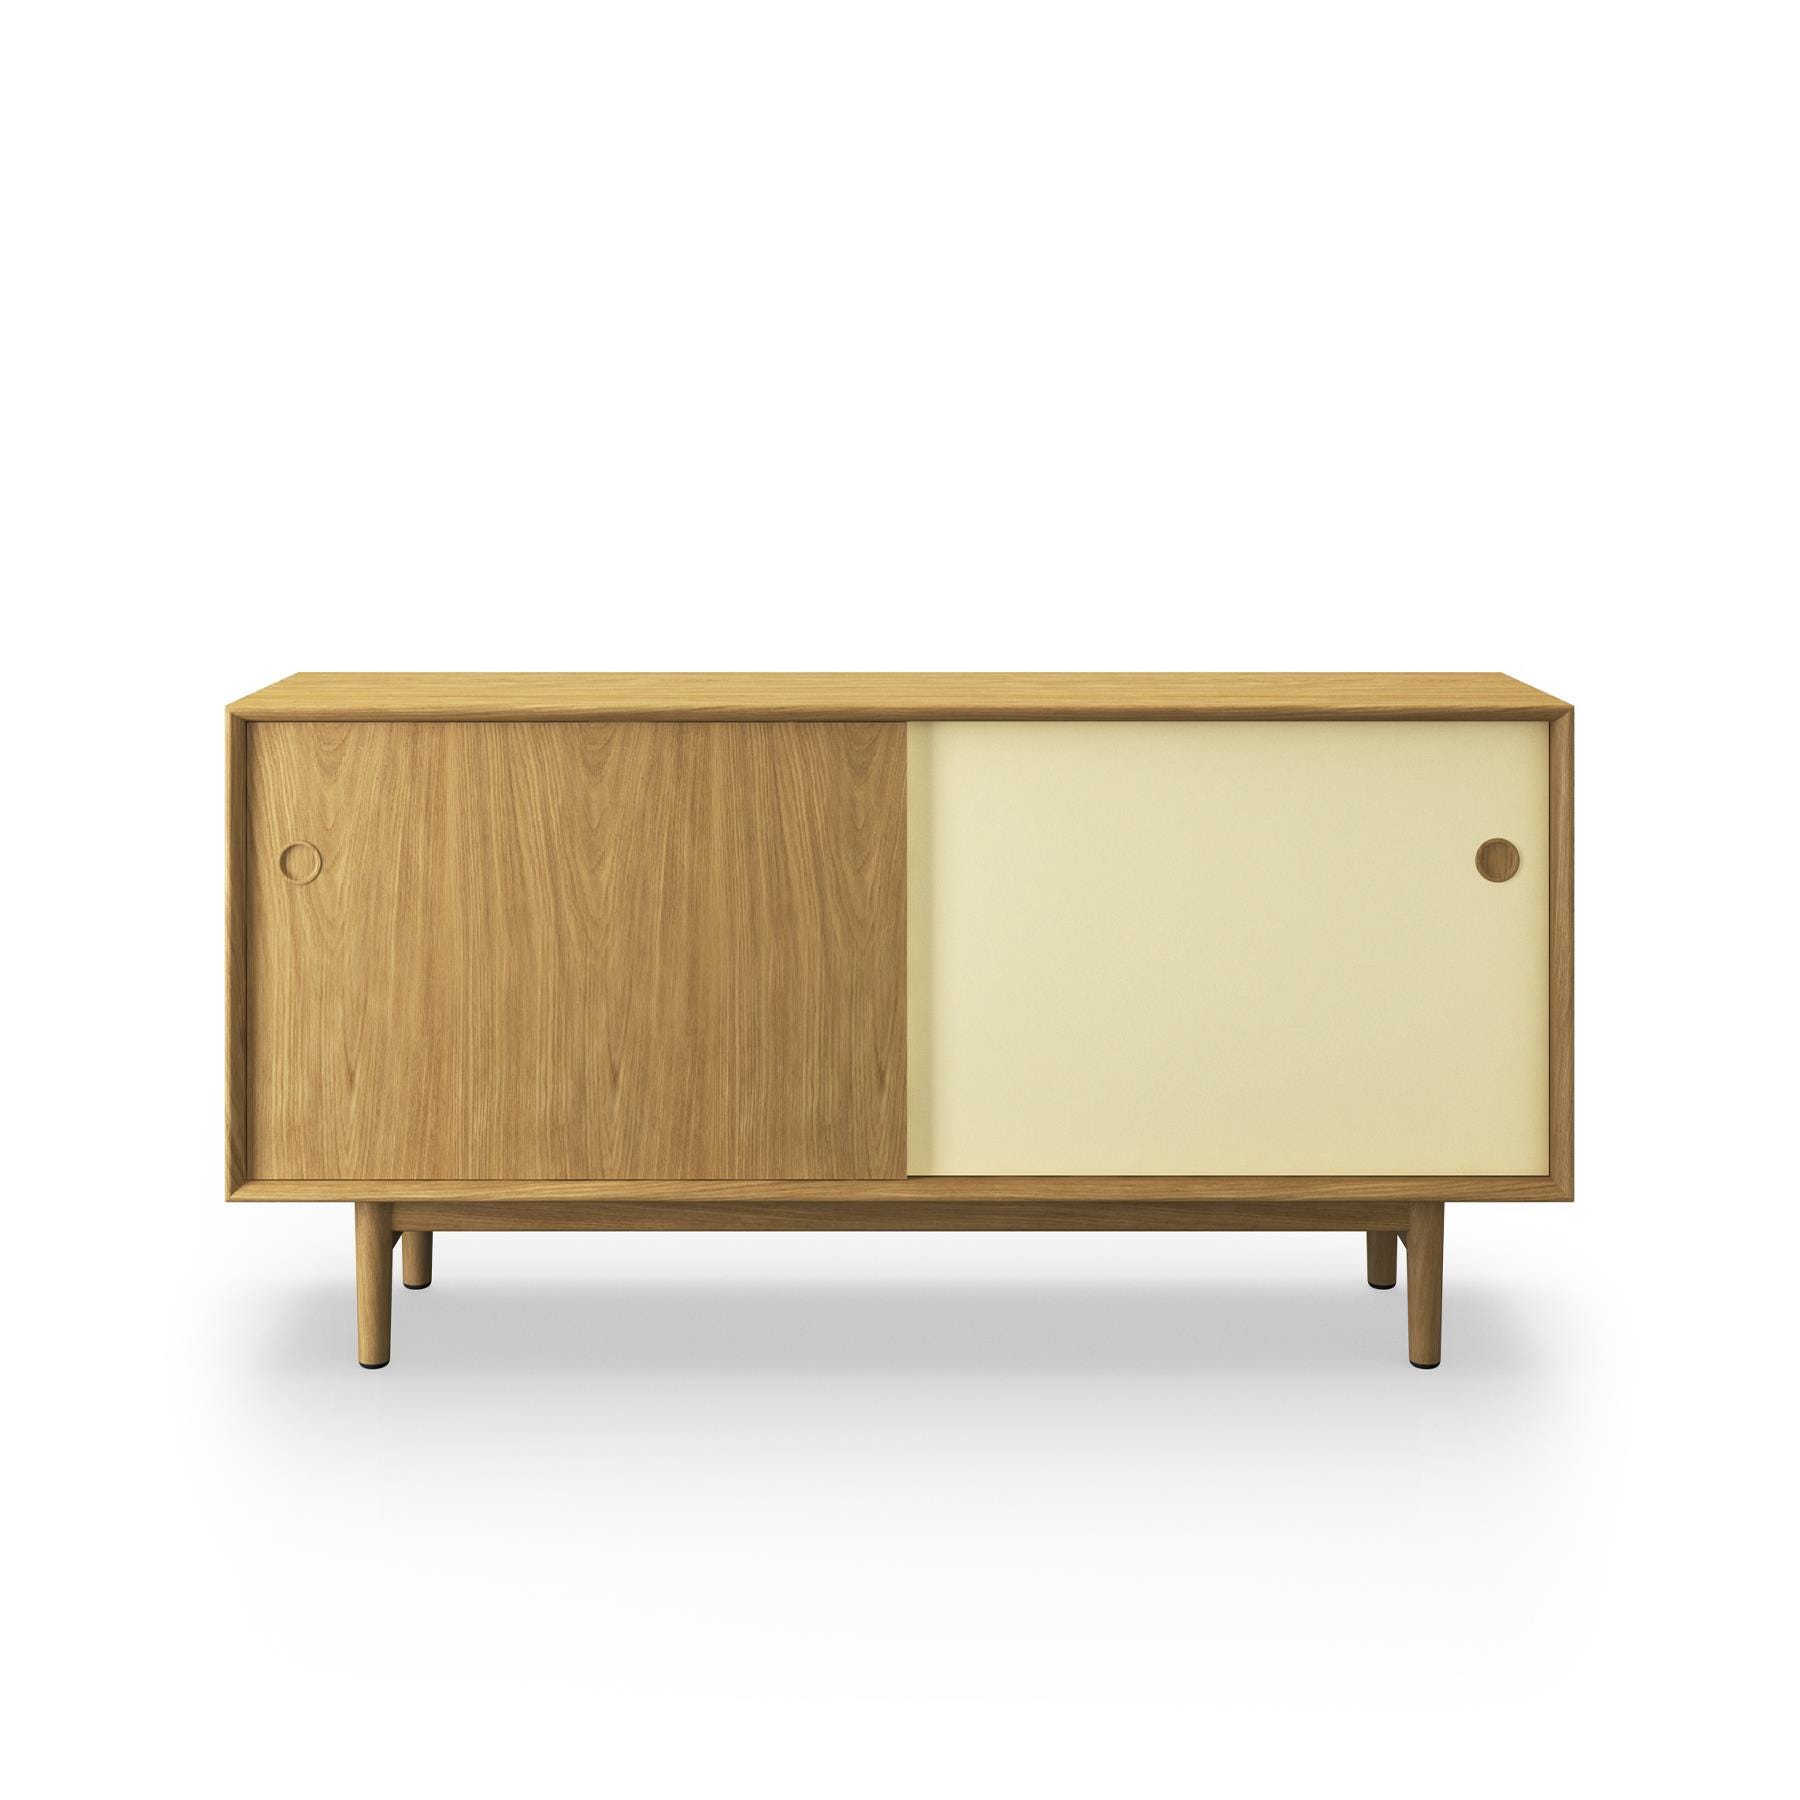 Sibast No 11 Sideboard Natural Oiled Oak Yellow And Natural Front Wooden Legs Light Wood Designer Furniture From Holloways Of Ludlow